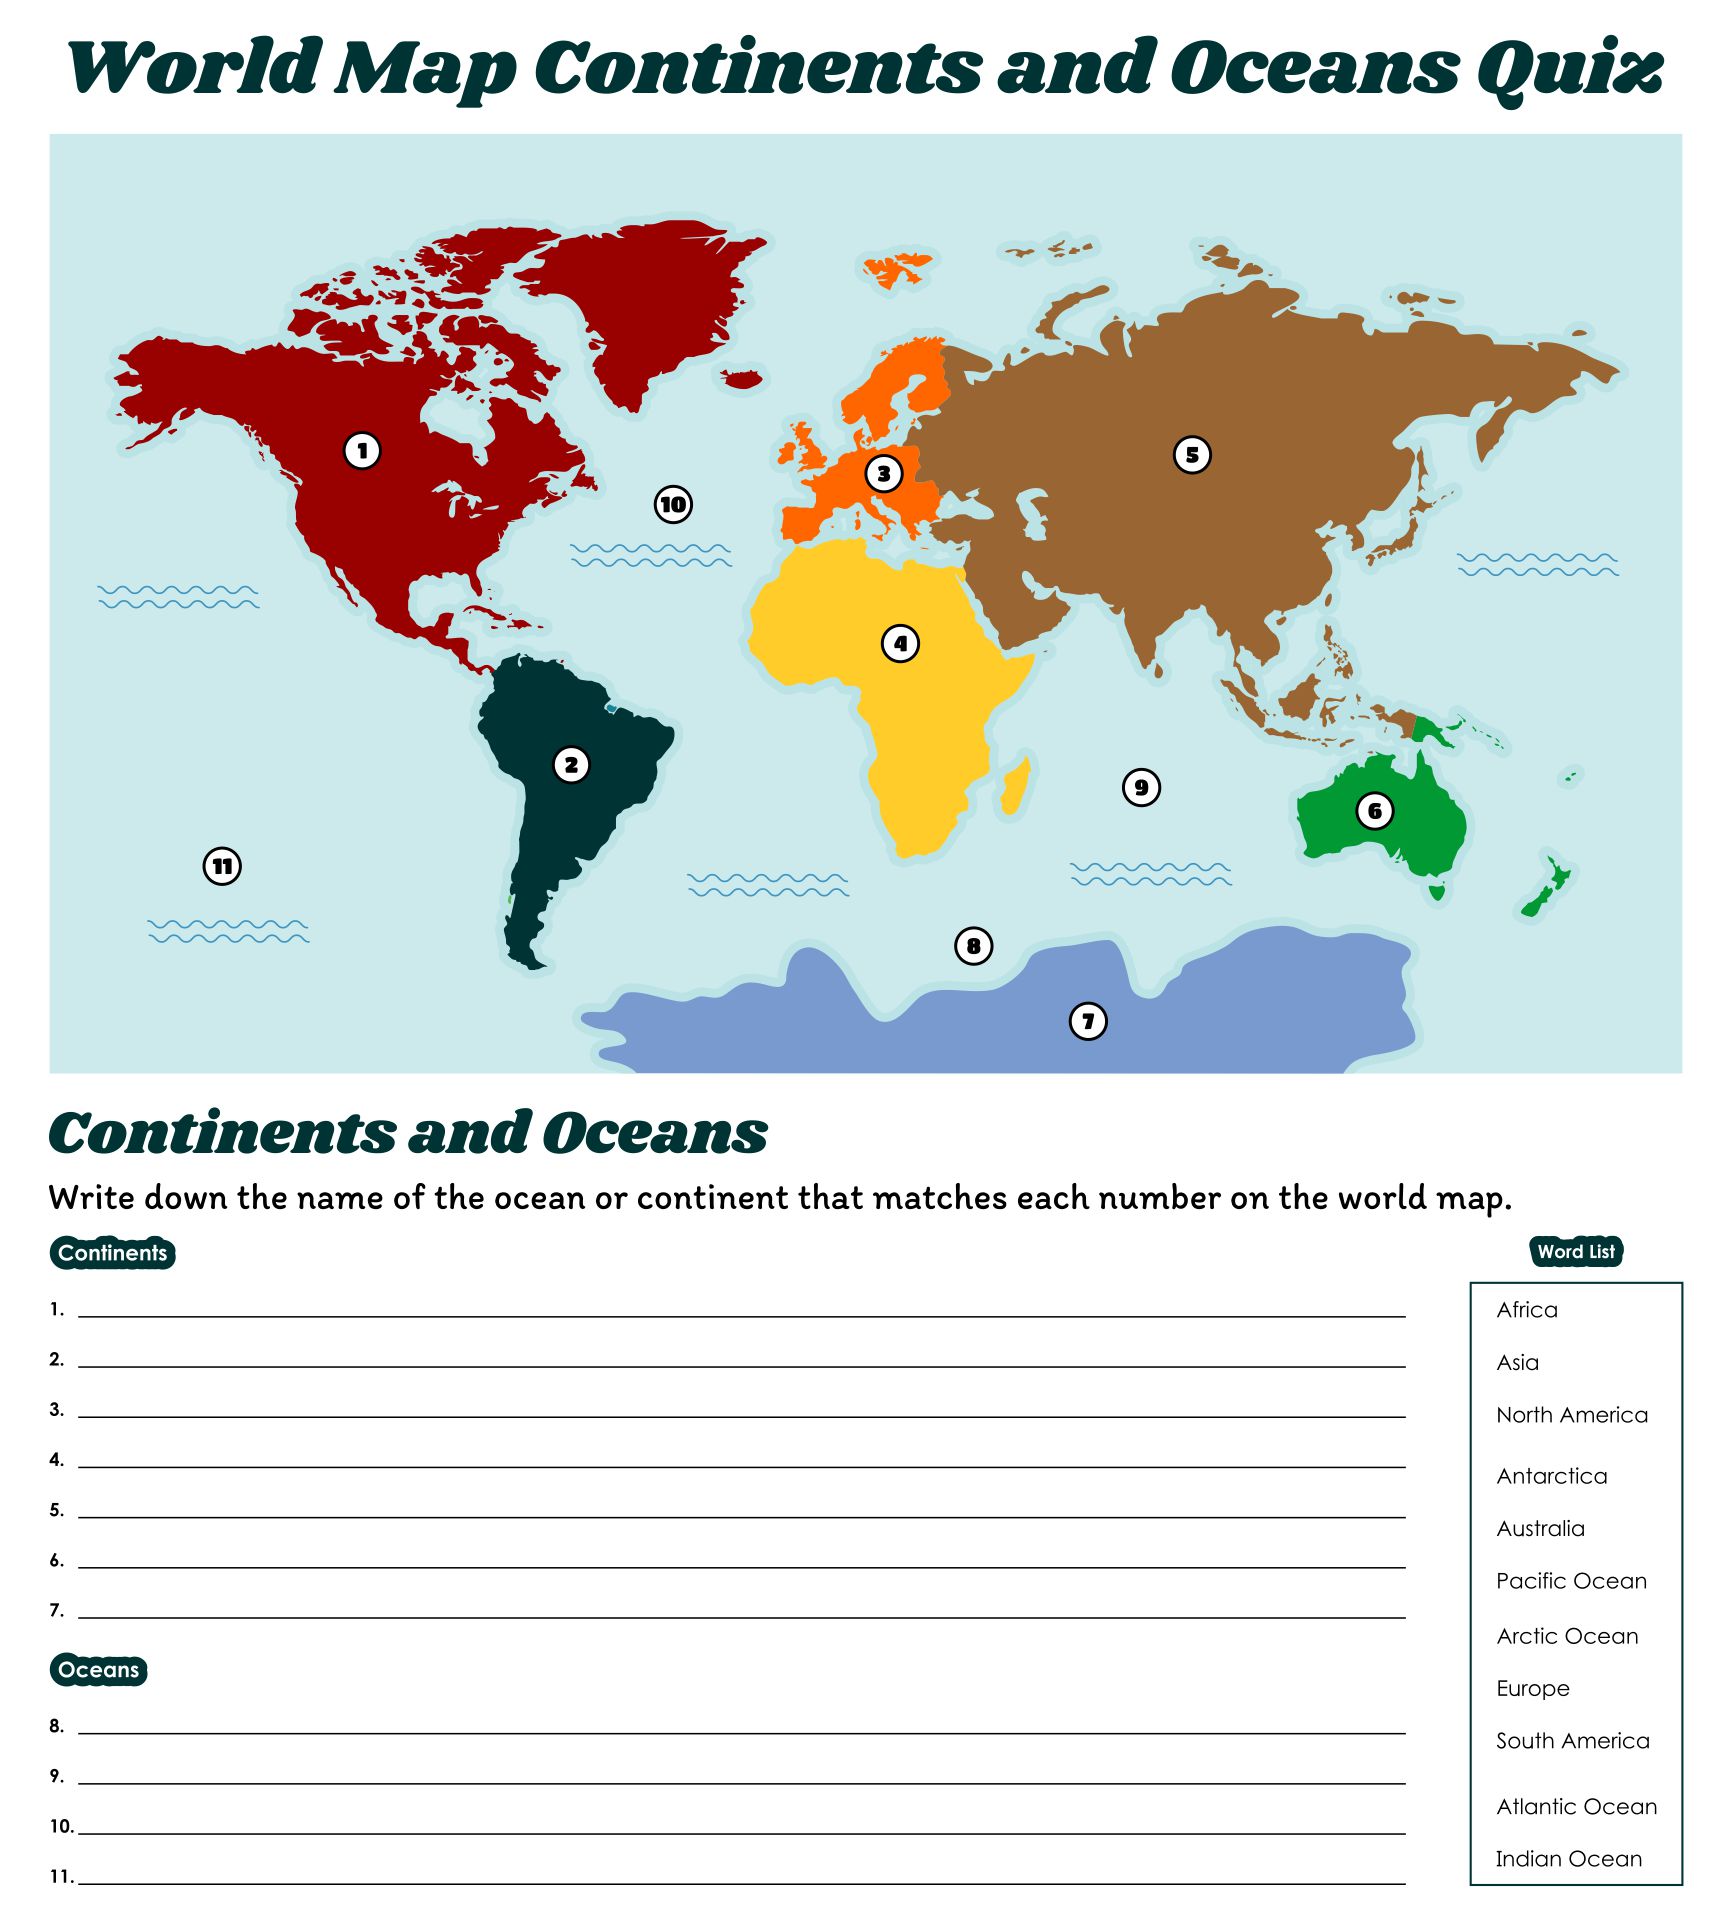 World Map Continents and Oceans Quiz